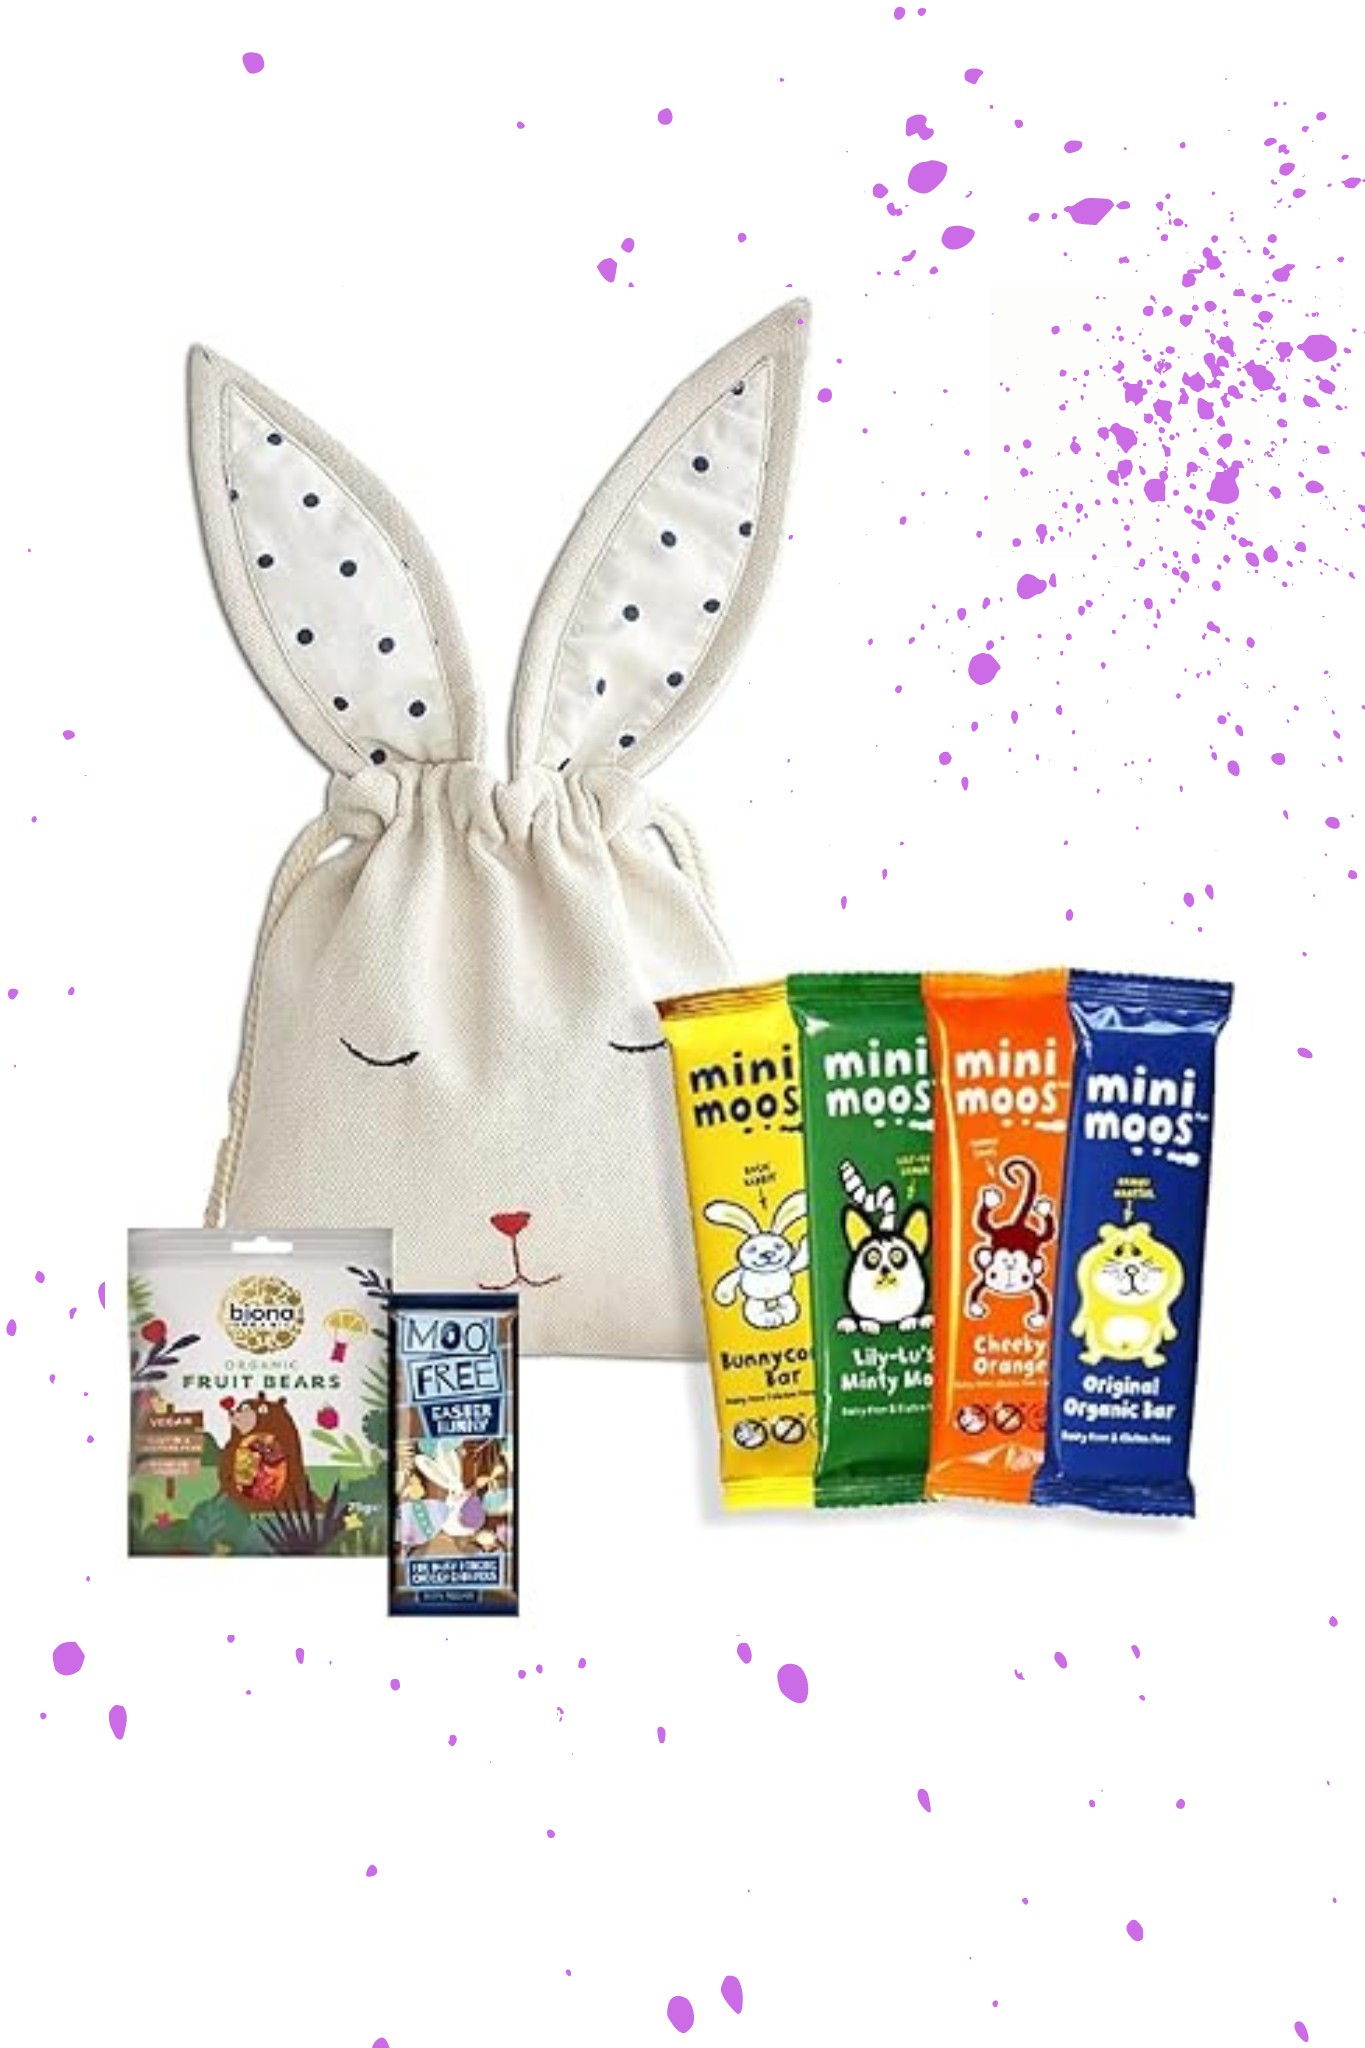 An Easter bunny bag with various gluten free candy inside.